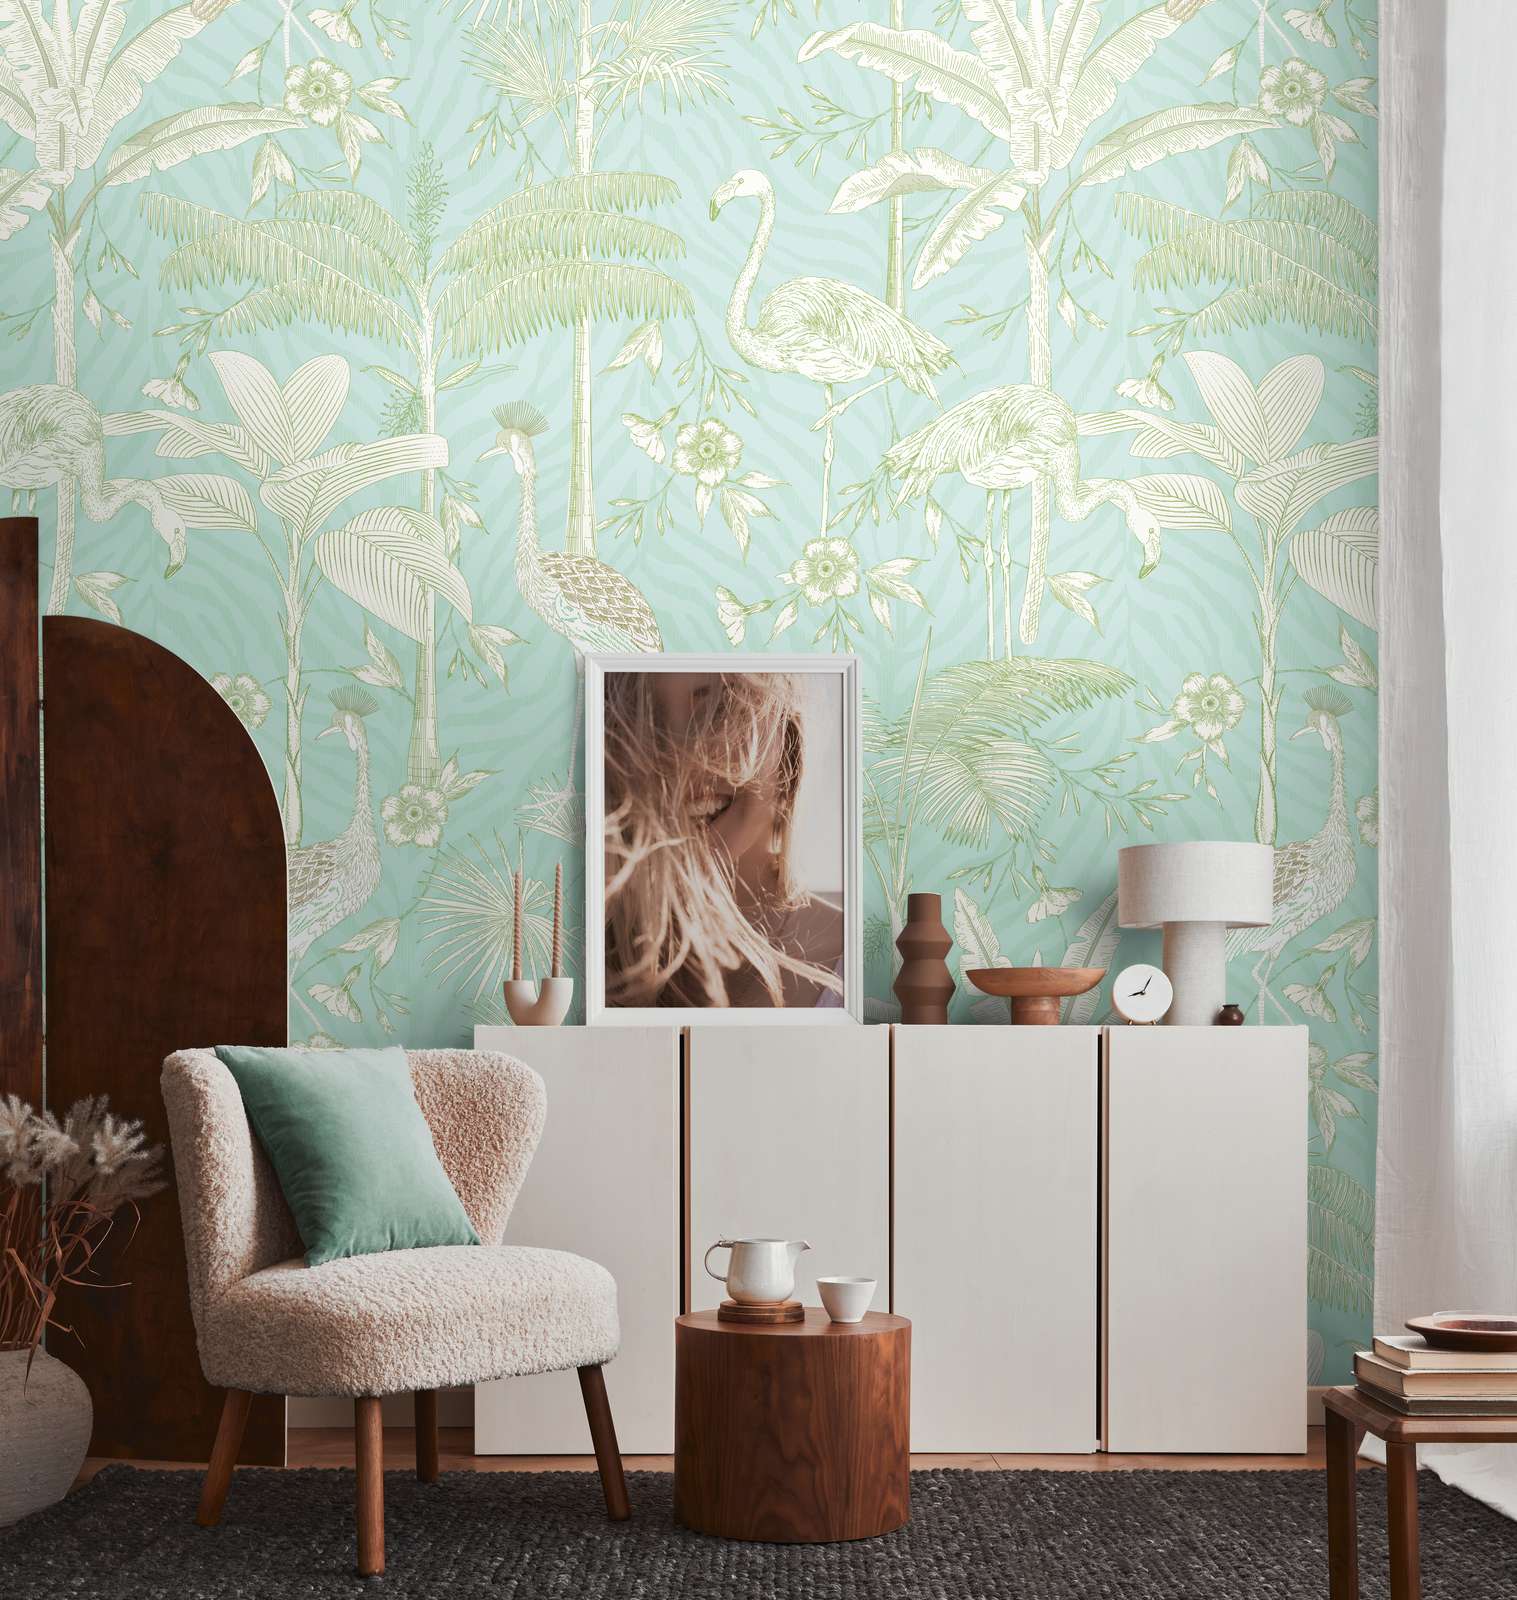             Non-woven wallpaper with flamingos and plants in pale colours - turquoise, white, green
        